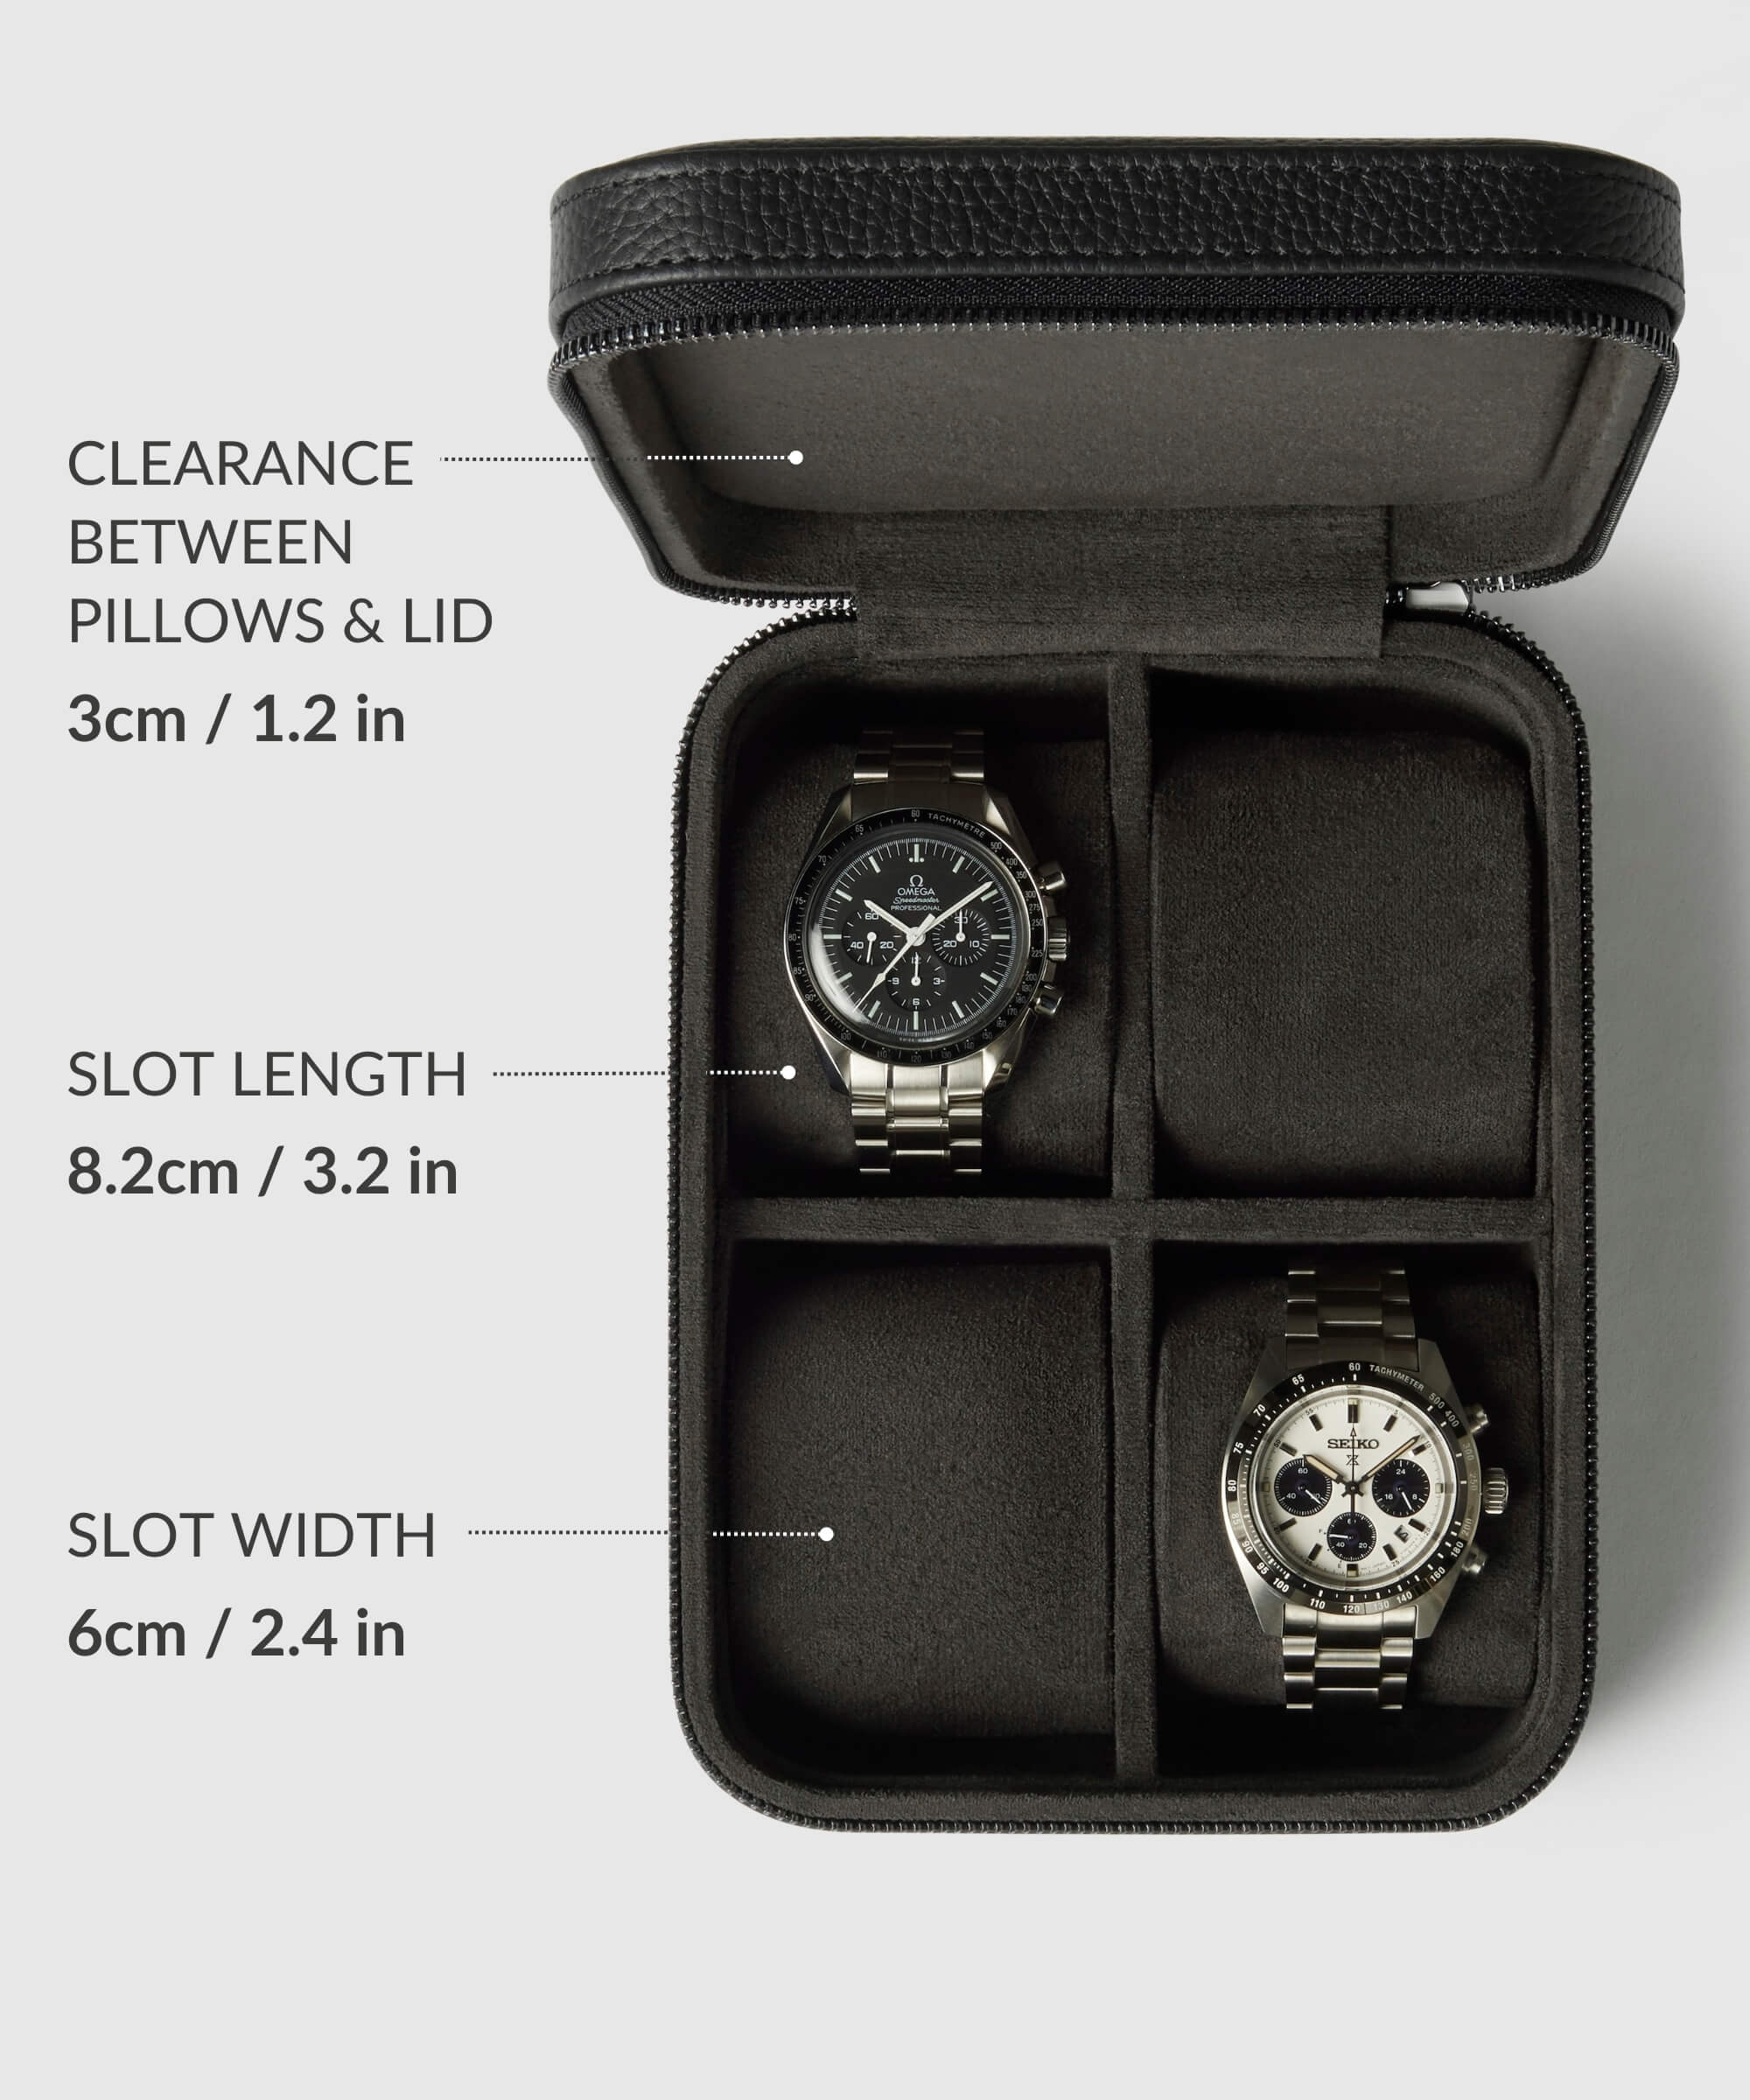 A TAWBURY Fraser 4 Watch Travel Case - Black (Coming Soon) from the Fraser Collection is open, displaying two watches. Measurements: 3cm clearance, 8.2cm slot length, 6cm slot width.